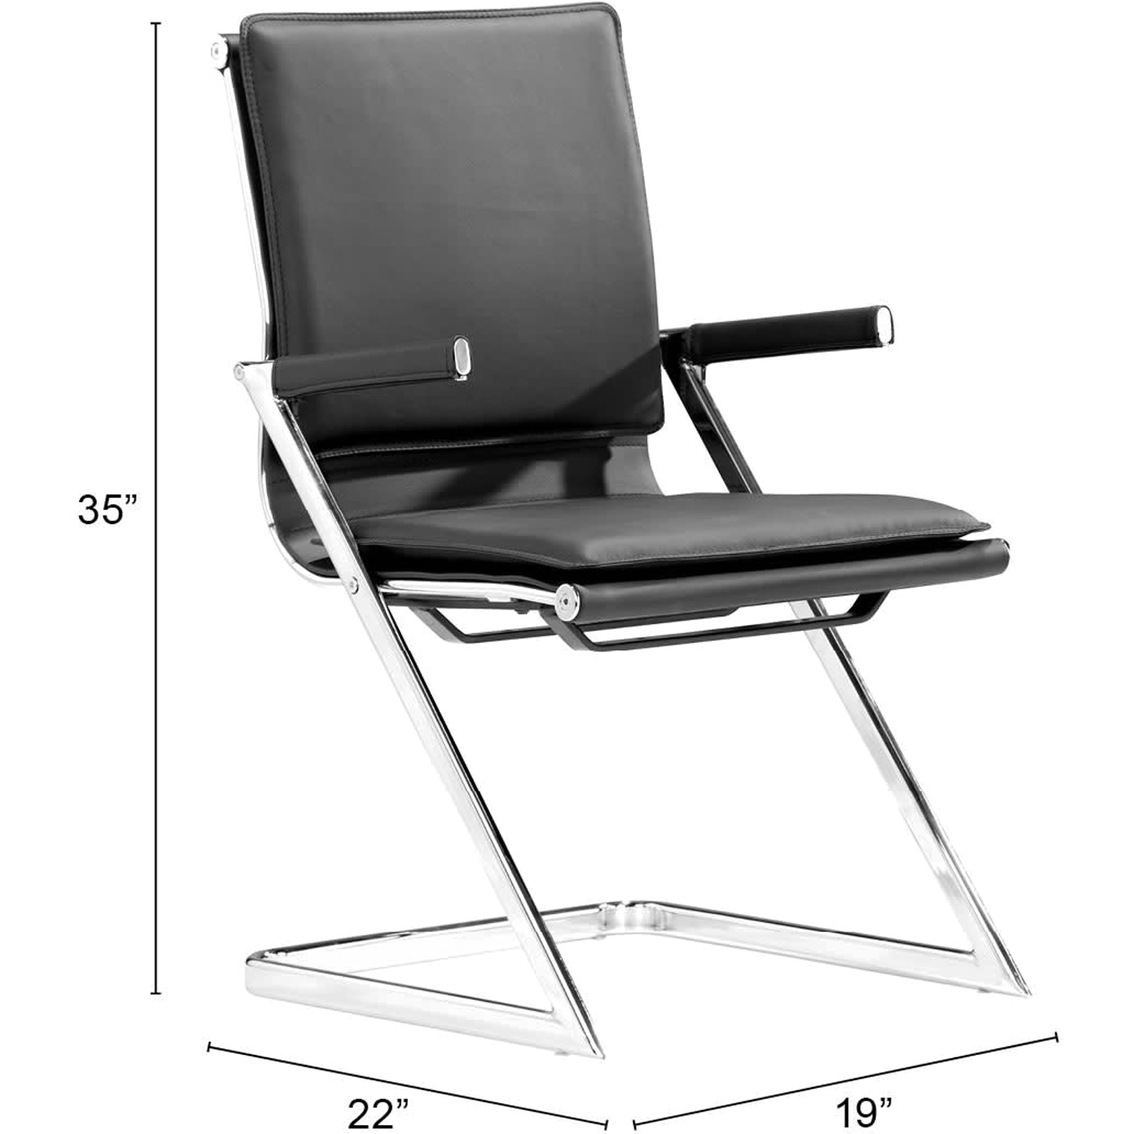 Zuo Lider Plus Conference Chair 2 Pk. - Image 5 of 7